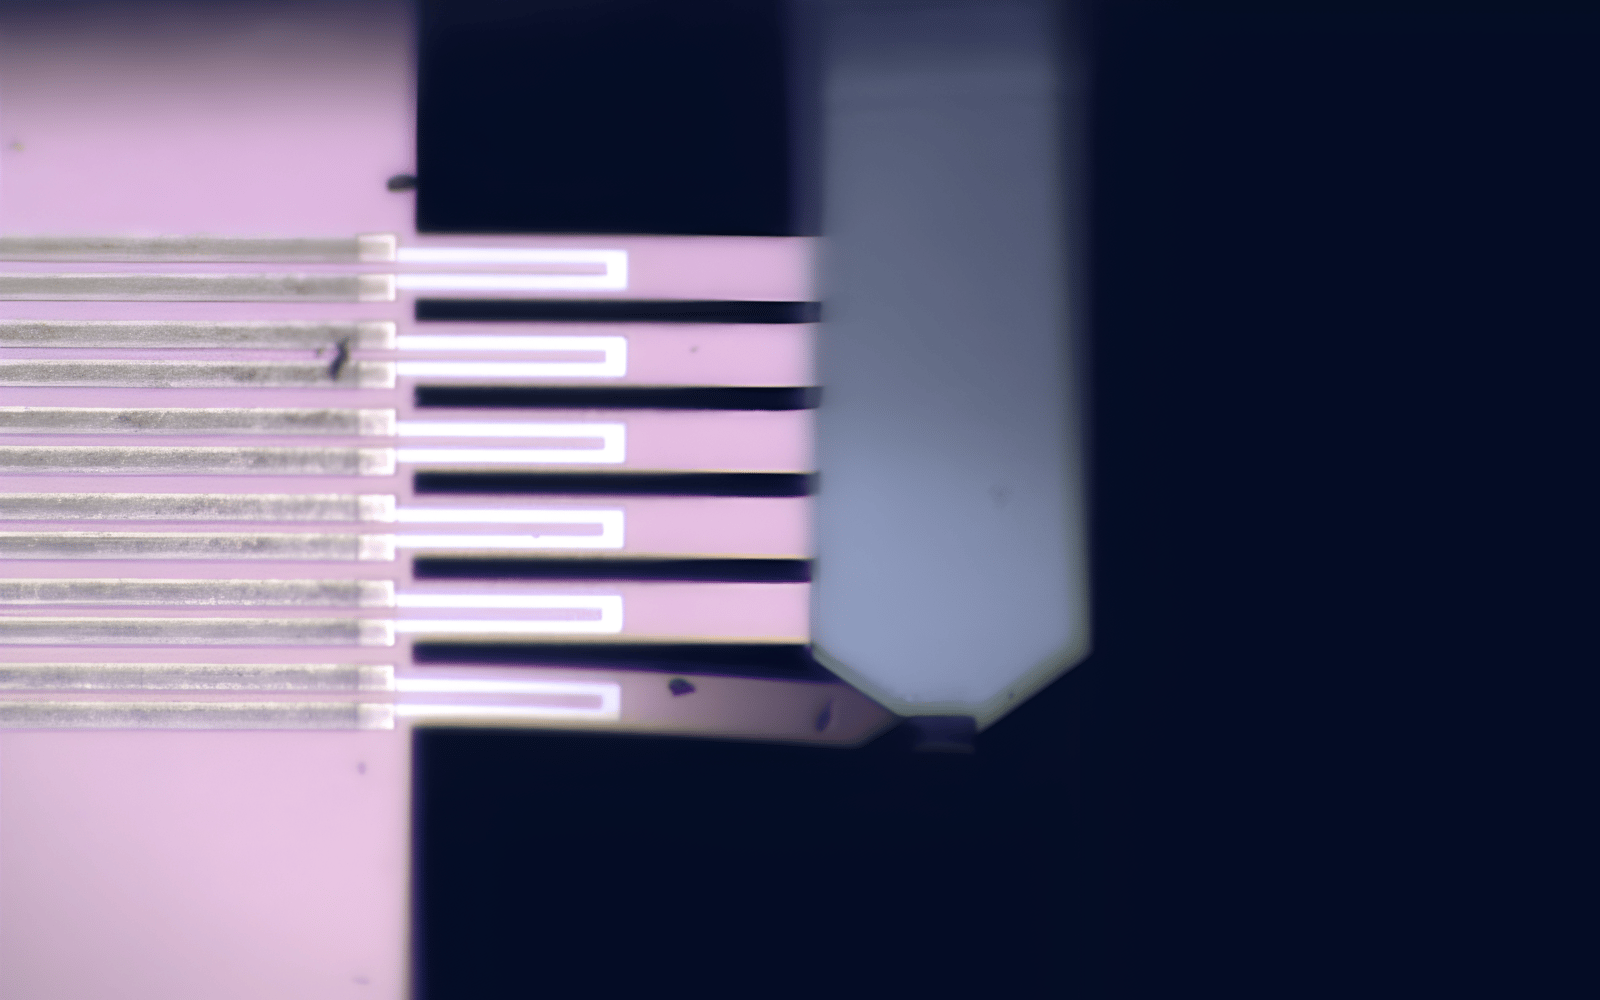 Close-up of a MEMS chip with cantilevers, highlighting integrated piezoresistive sensors for force measurement.